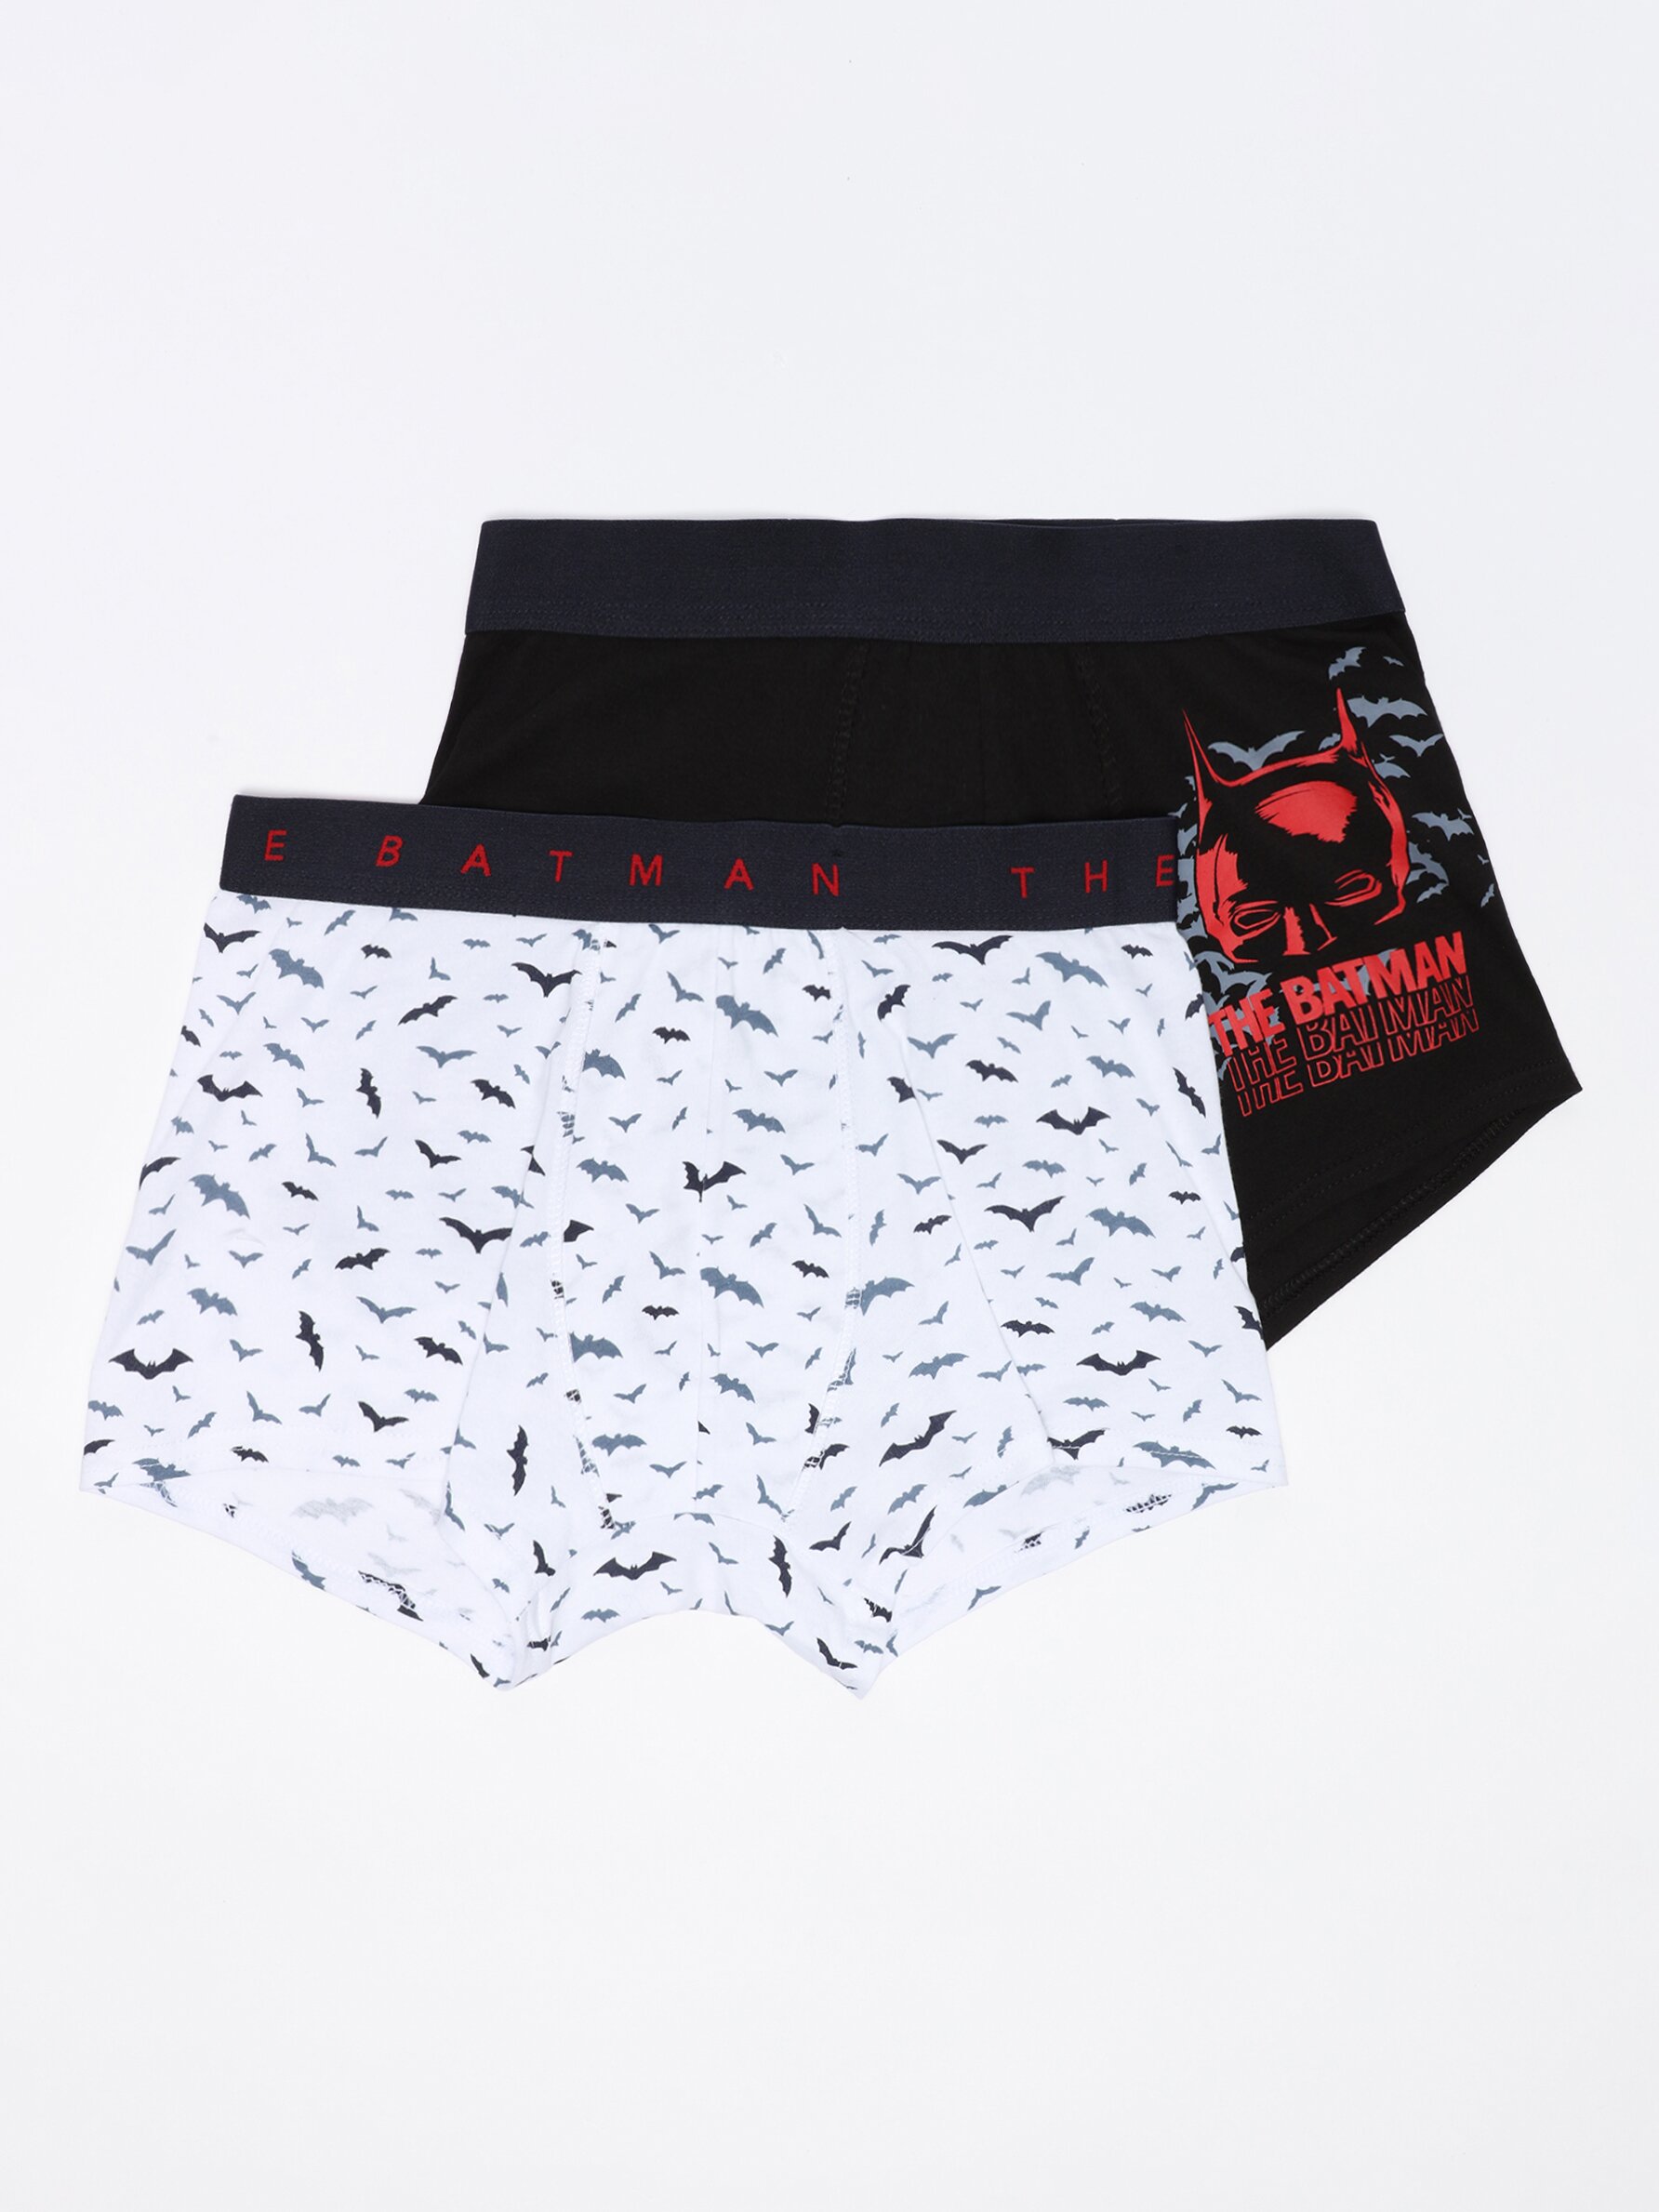 Pack of 2 pairs of Batman ©DC boxer briefs - COLLABS - CLOTHING - MAN - |  Lefties Bahrain